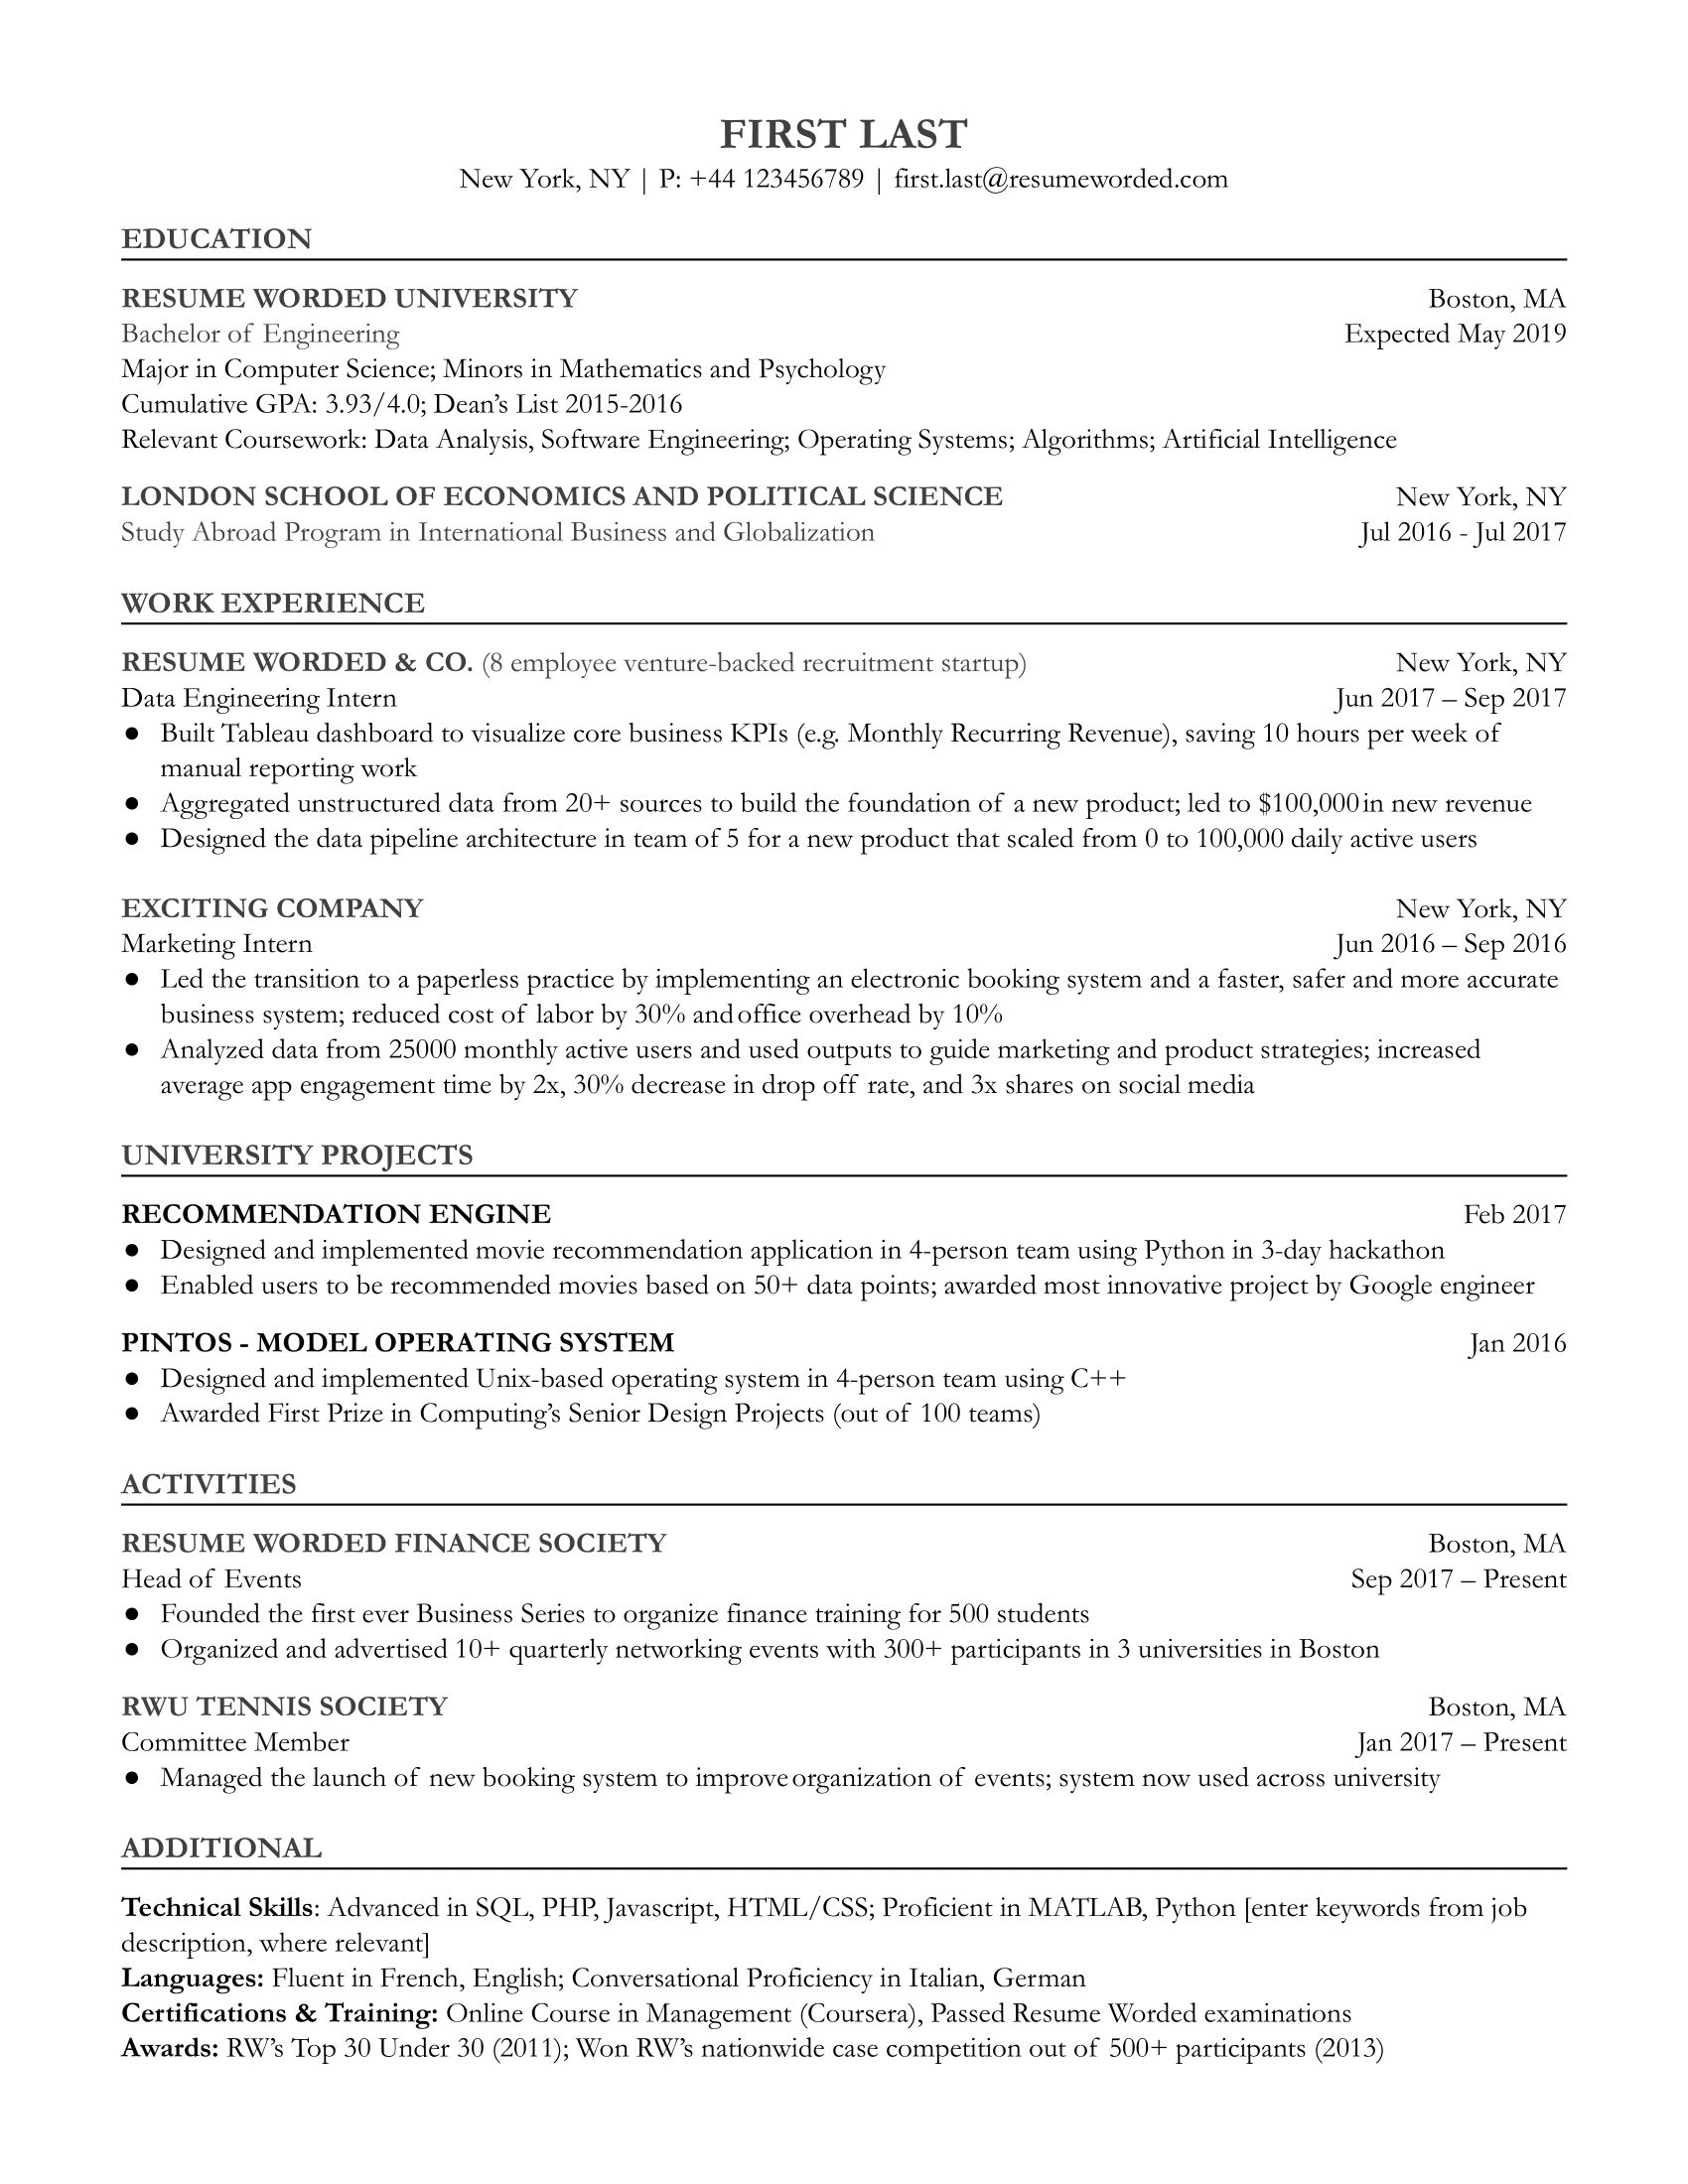 Entry Level Data Engineer Resume Template + Example